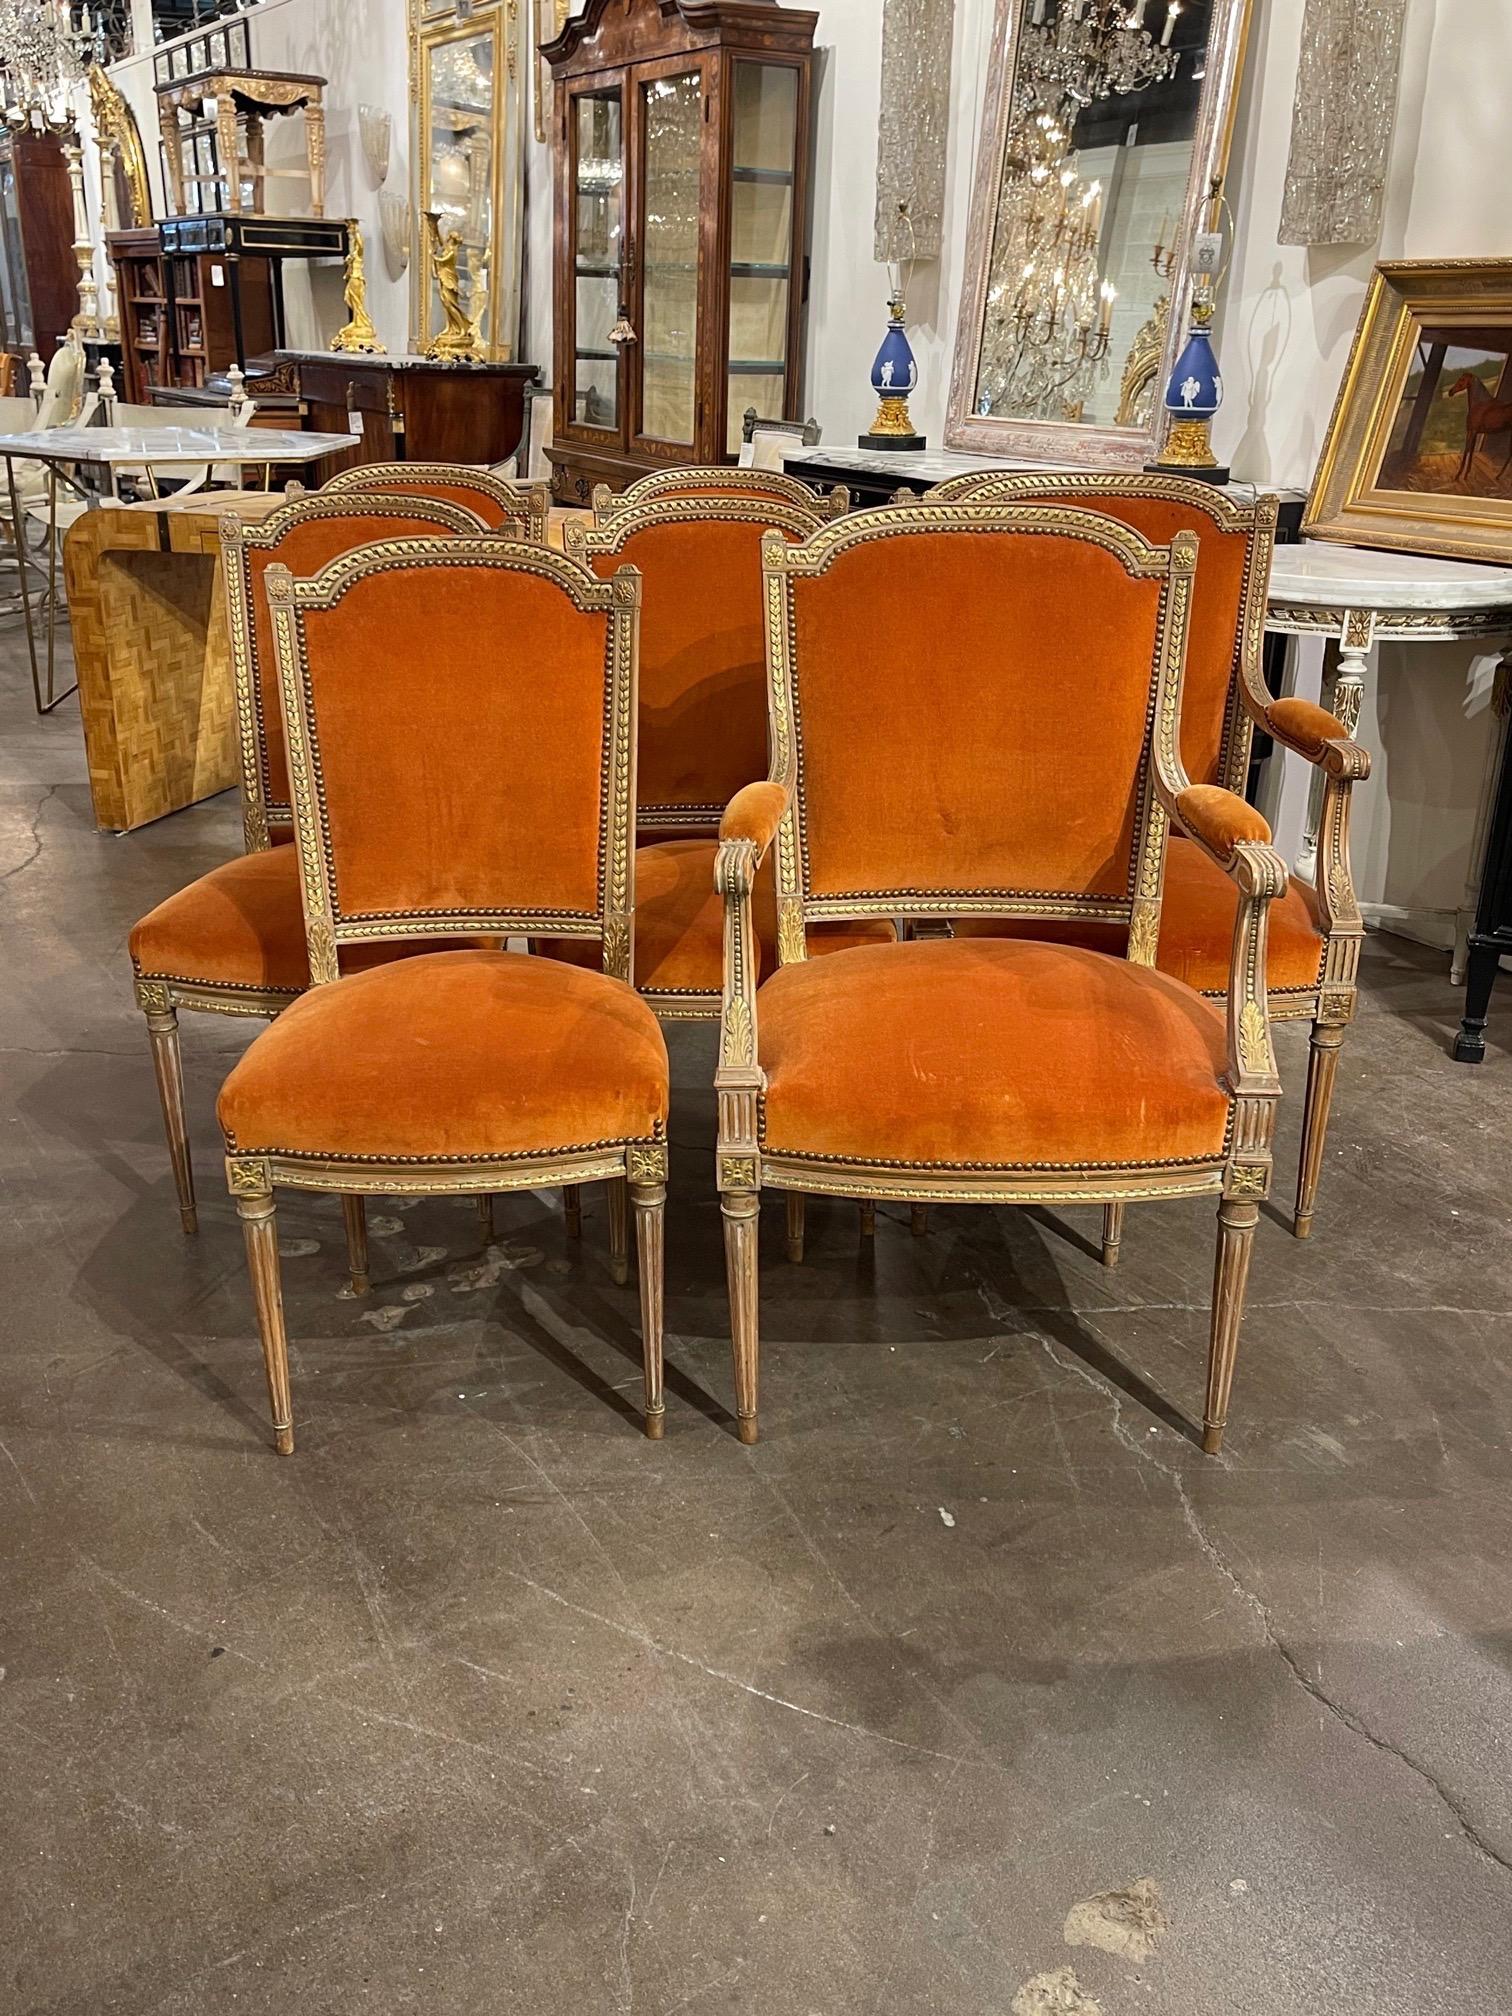 Great set of 19th dining century French Louis XVI style carved and gilded dining chairs. There are 2 armchair and 6 side chairs upholstered in an orange velour. Fabulous carving and patina as well. An exceptional set!